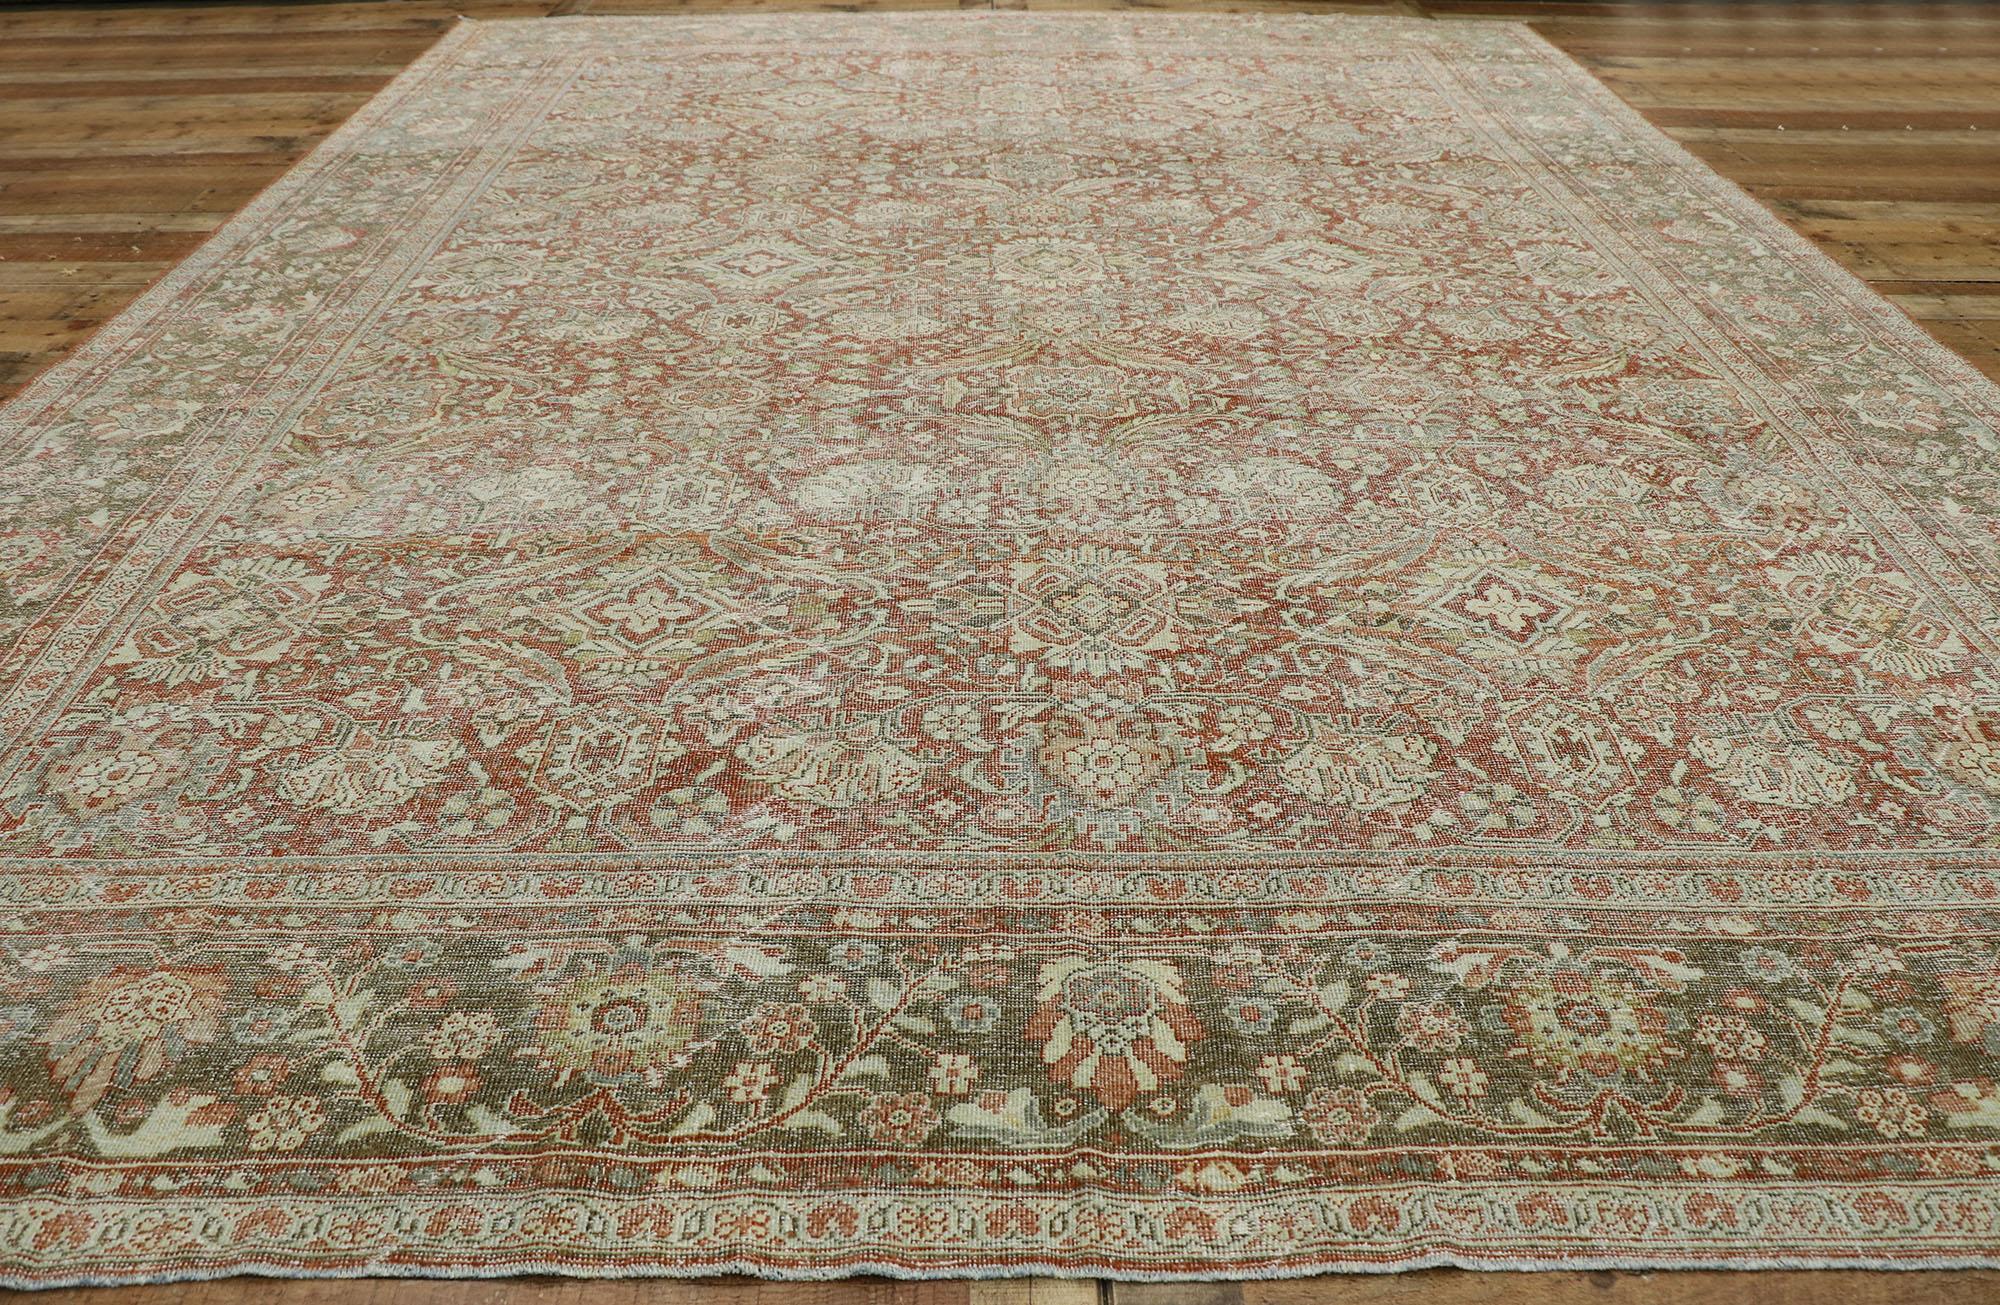 Wool Distressed Antique Persian Mahal Rug with Rustic American Colonial Style For Sale